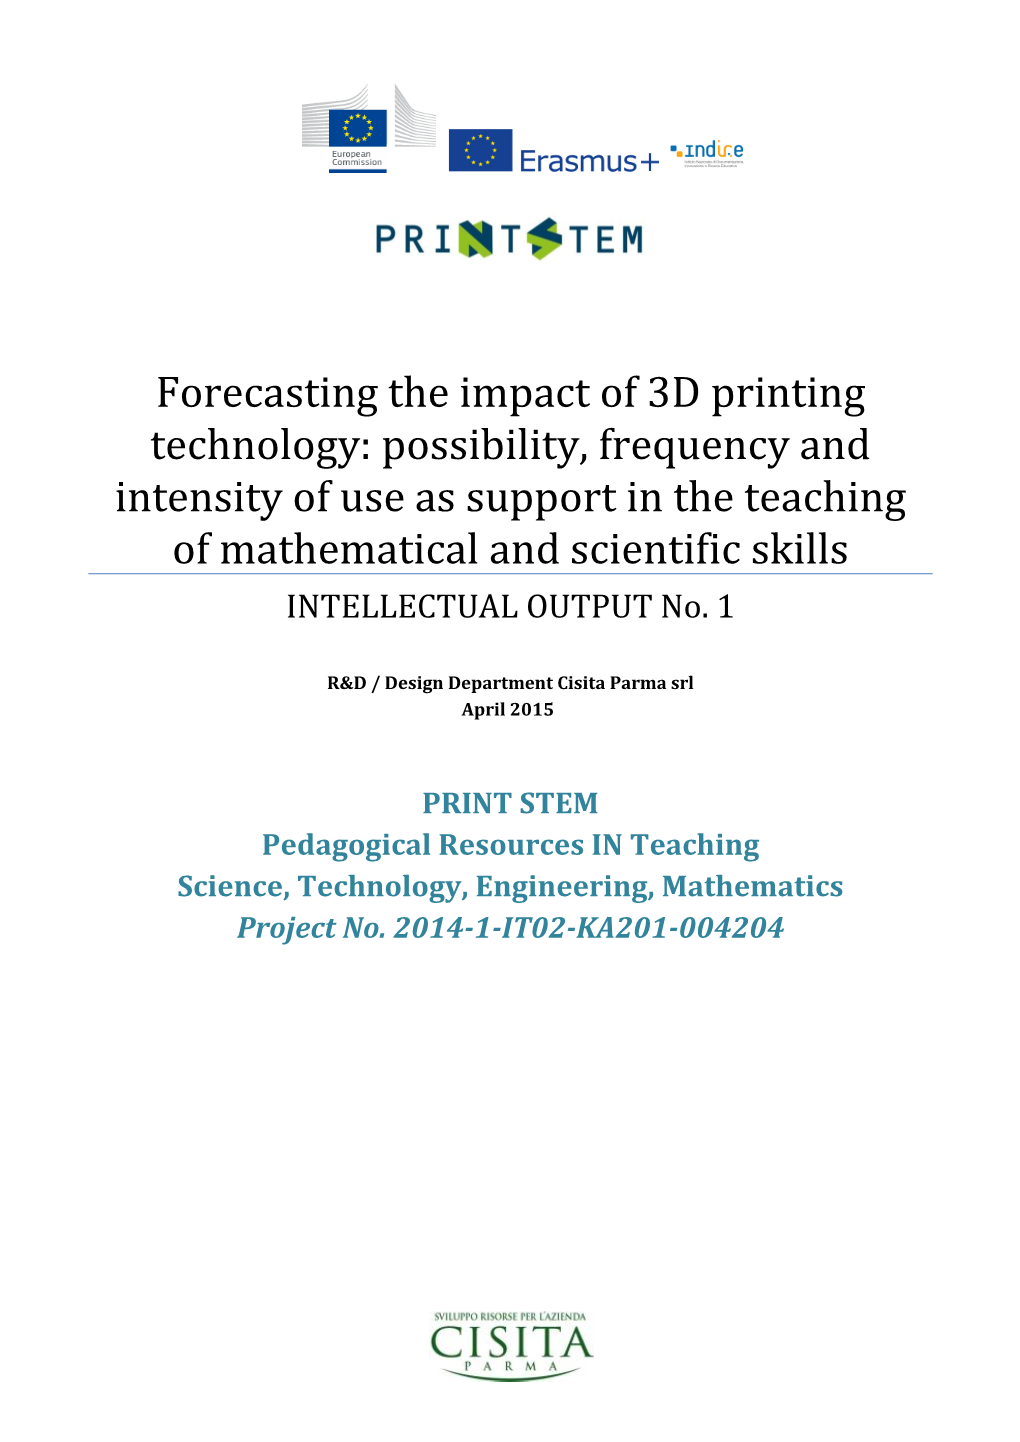 Forecasting the Impact of 3D Printing Technology